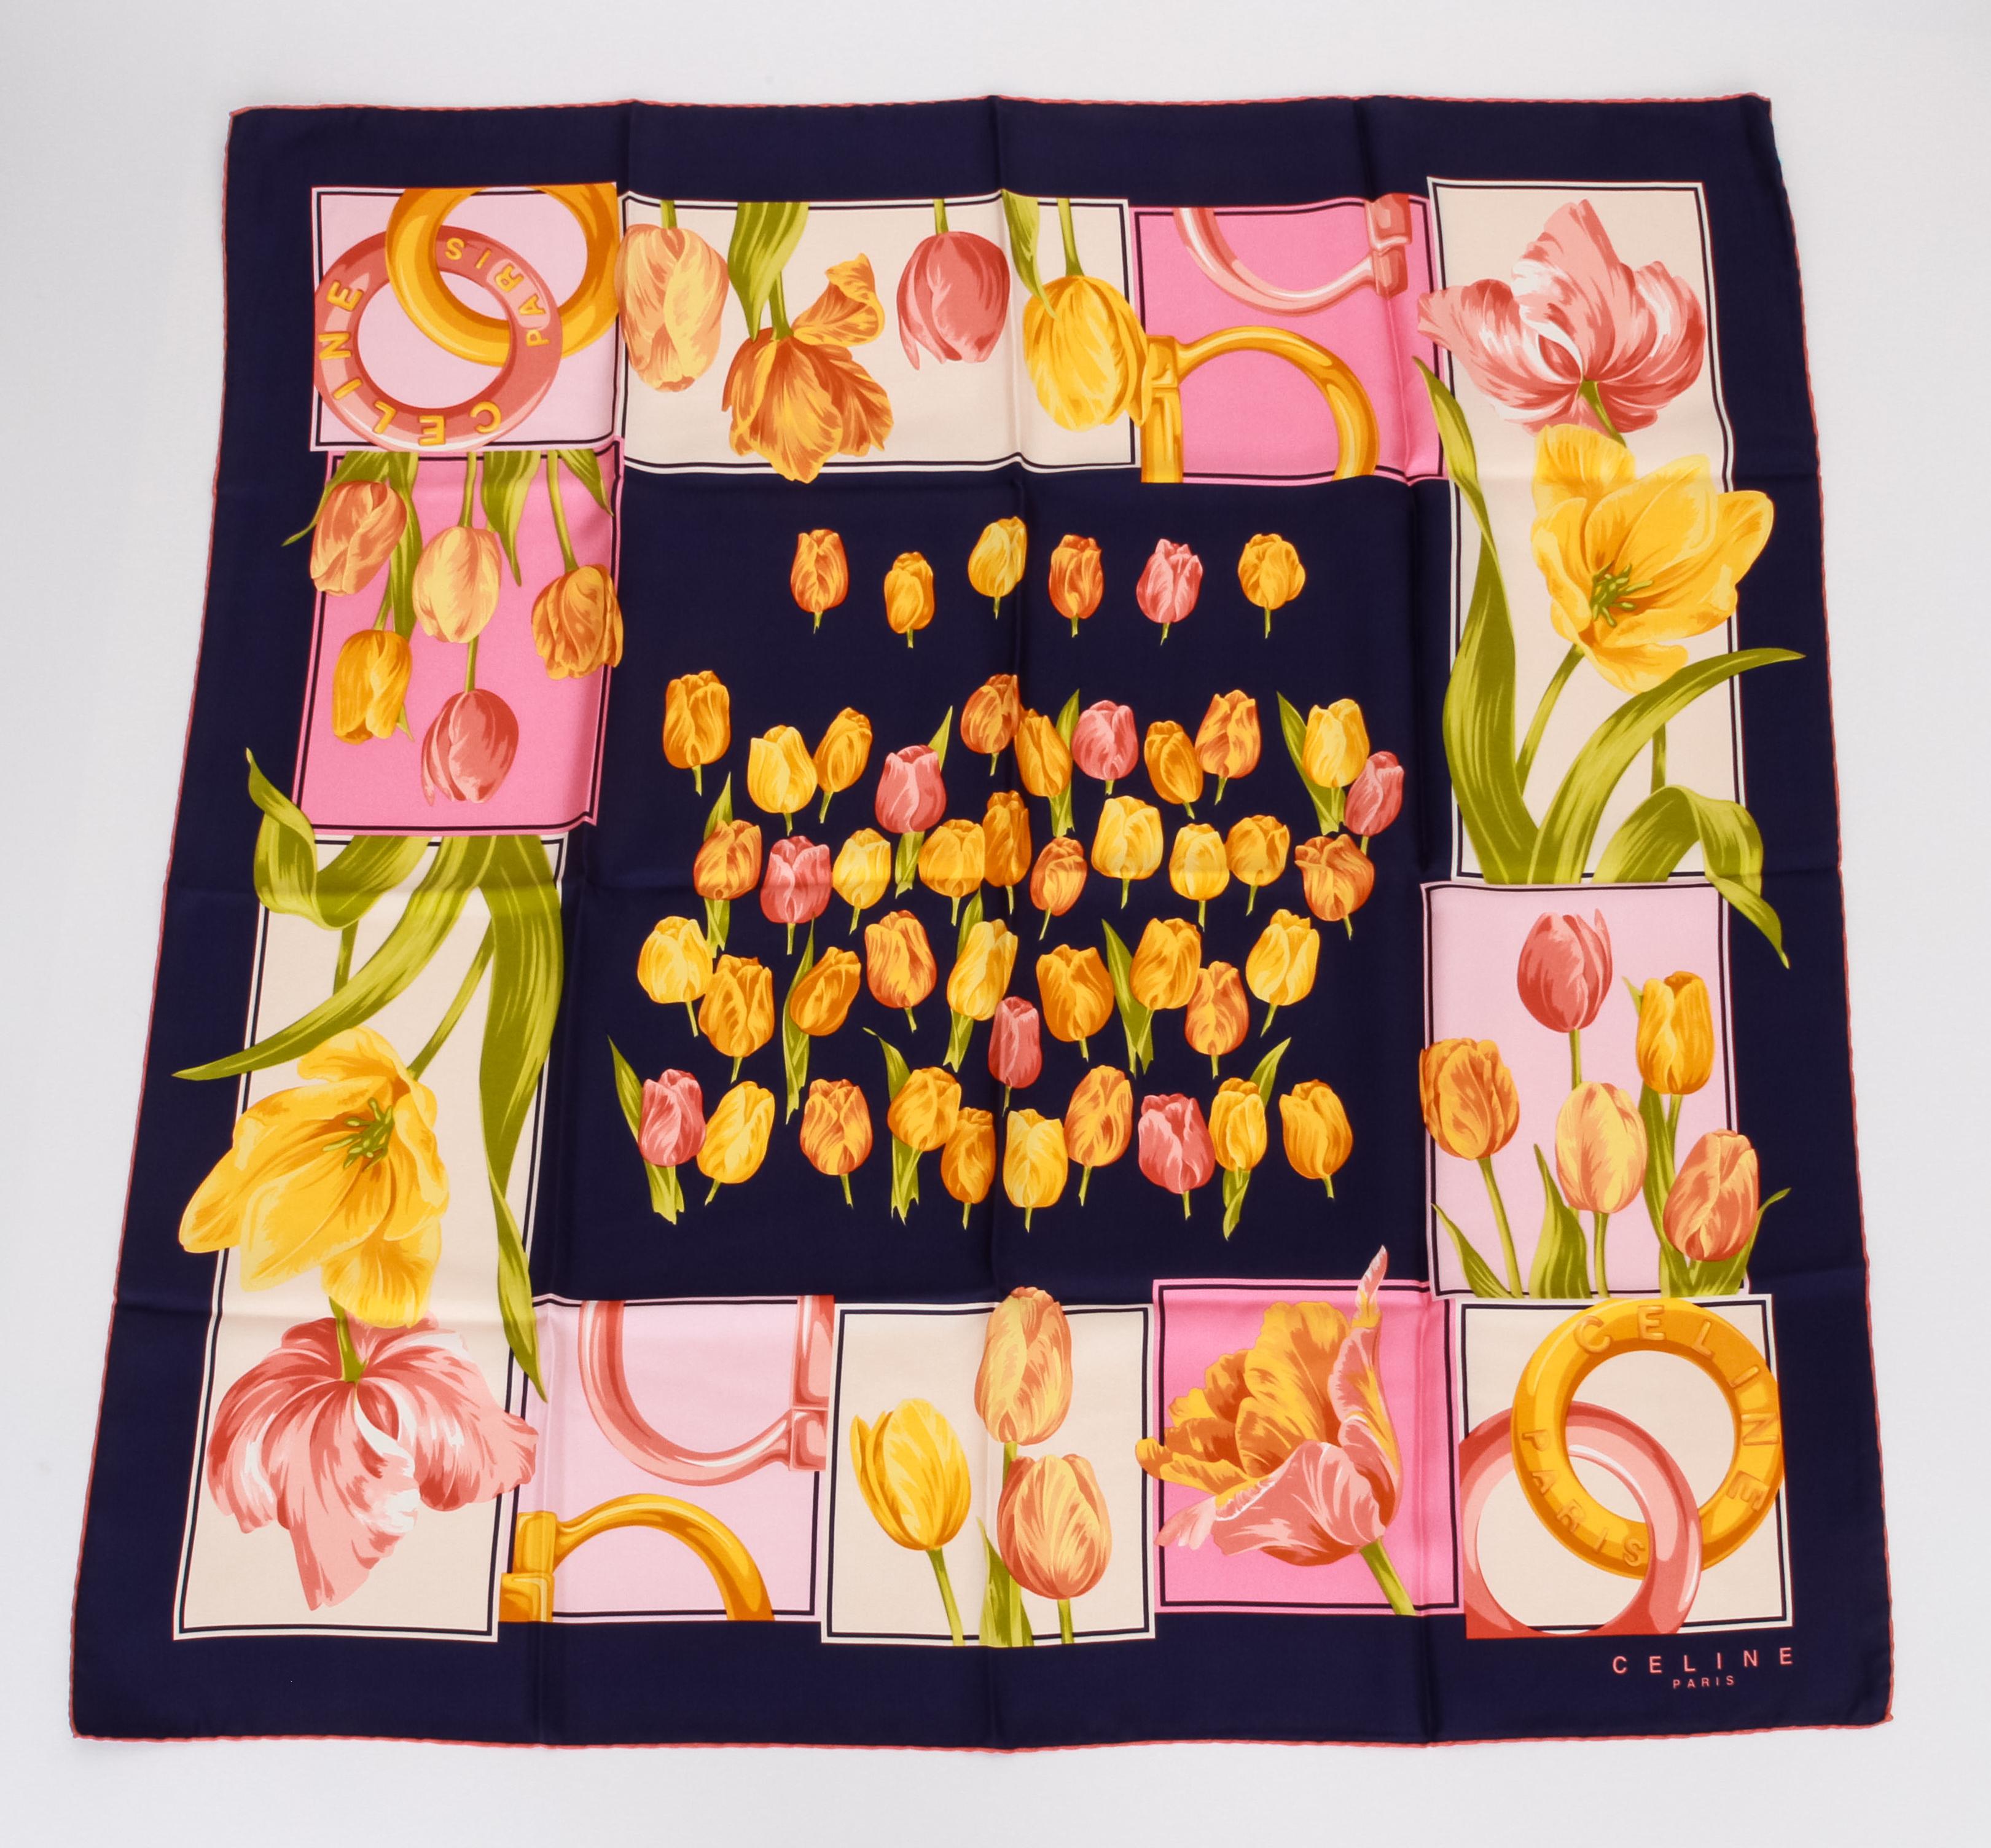 Celine excellent condition preowned scarf with tulips design. 100% silk.
35